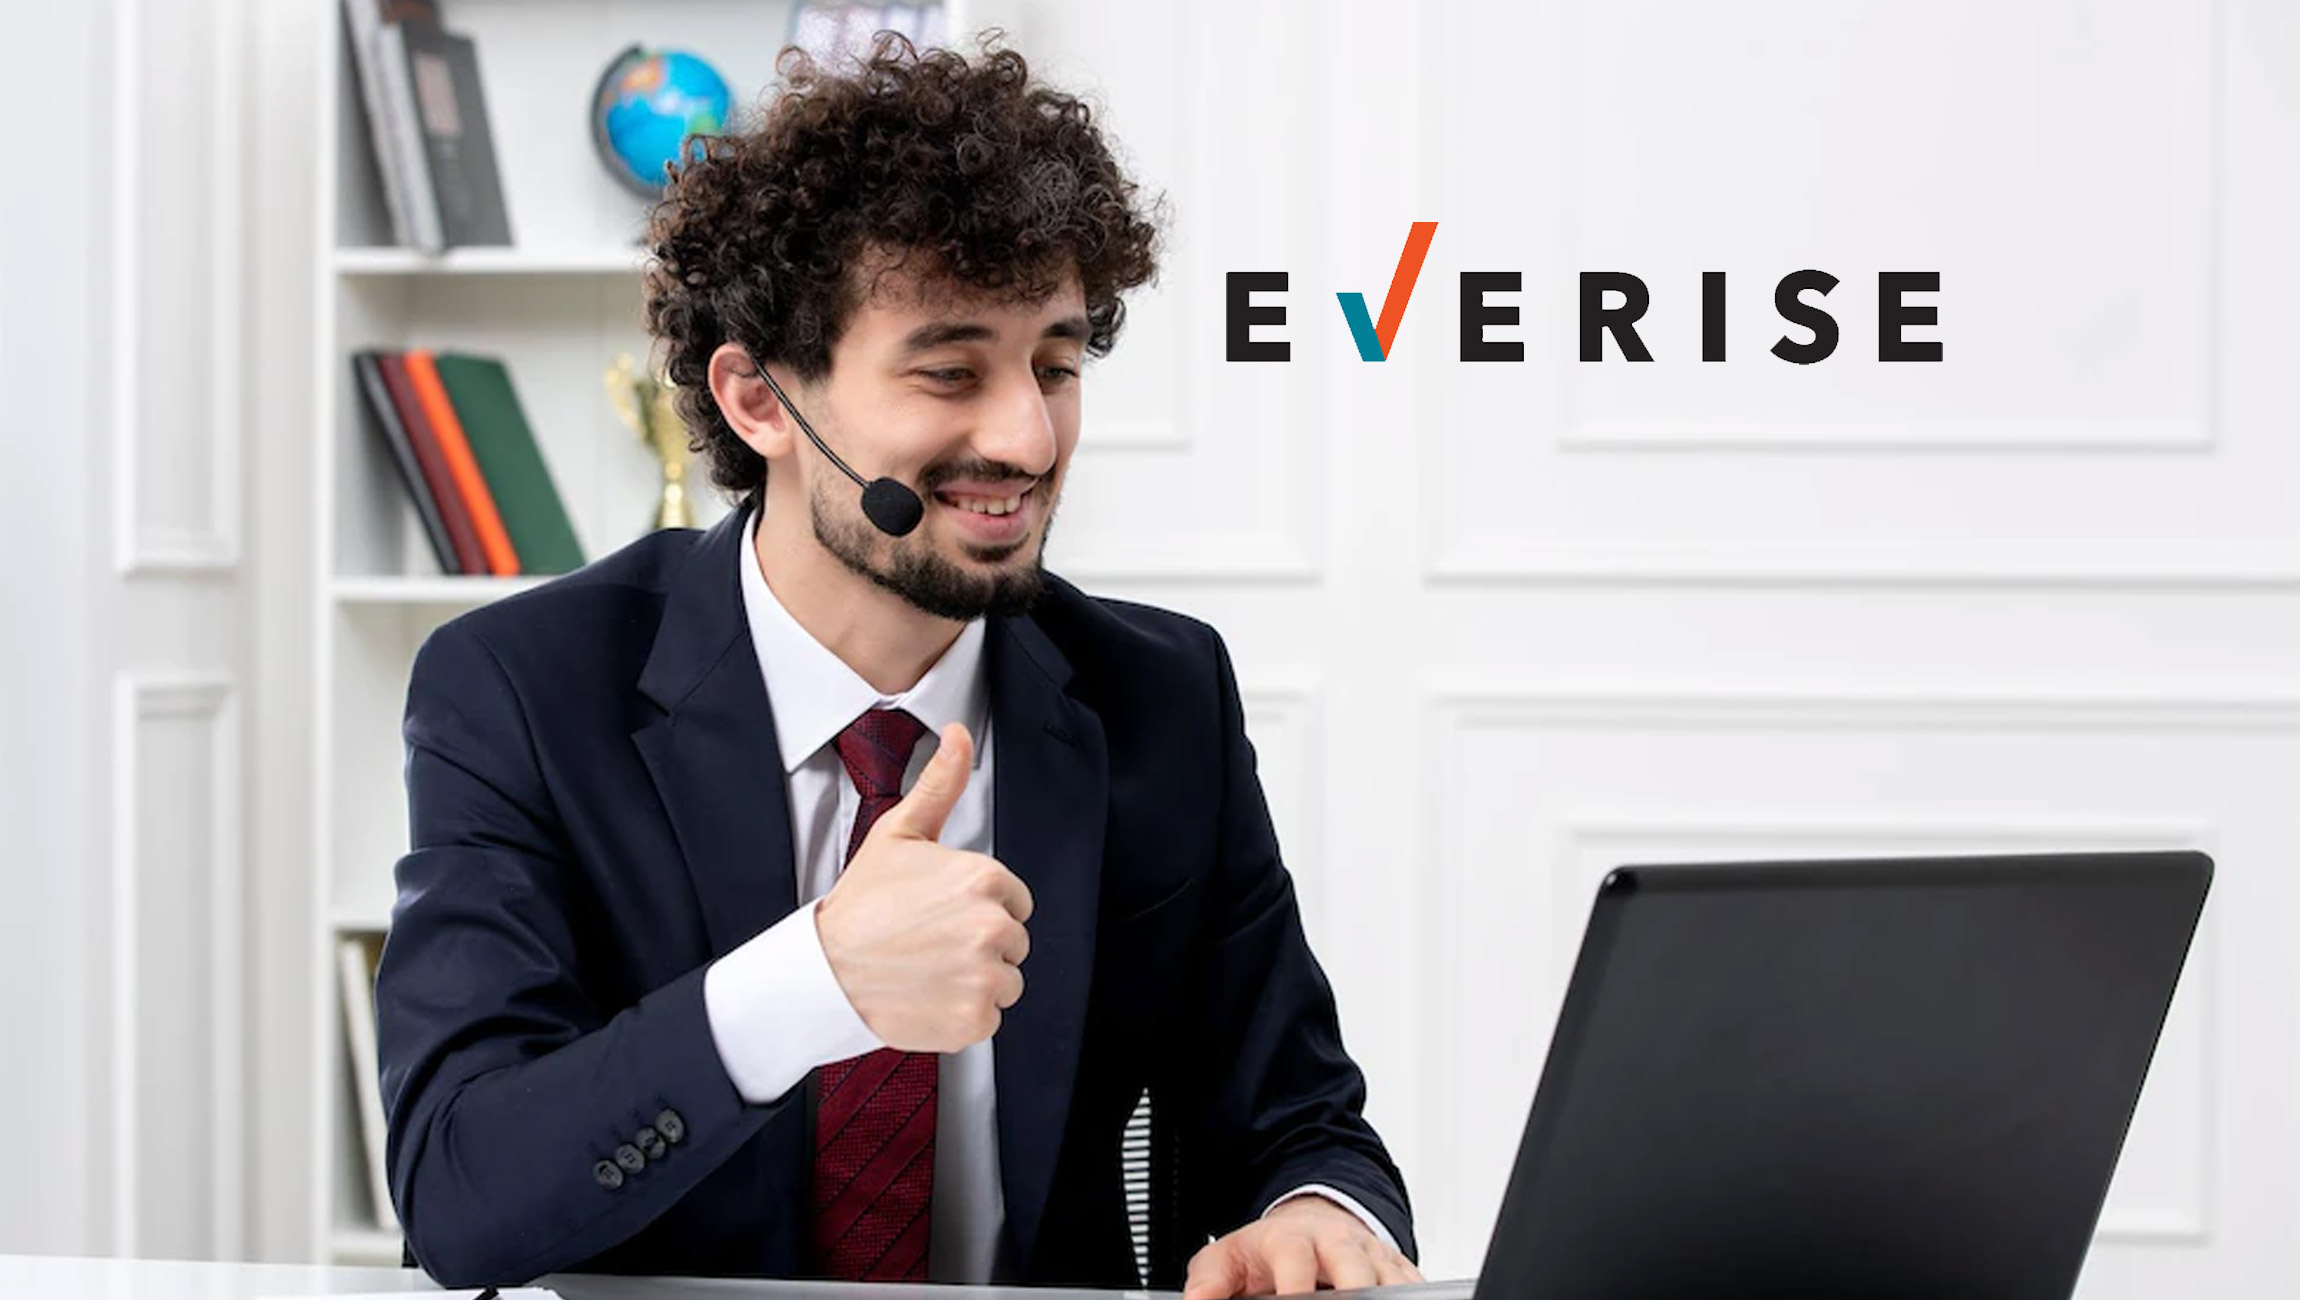 Everise Repositions Branding to Cement Evolution as End-to-End Customer Service Player